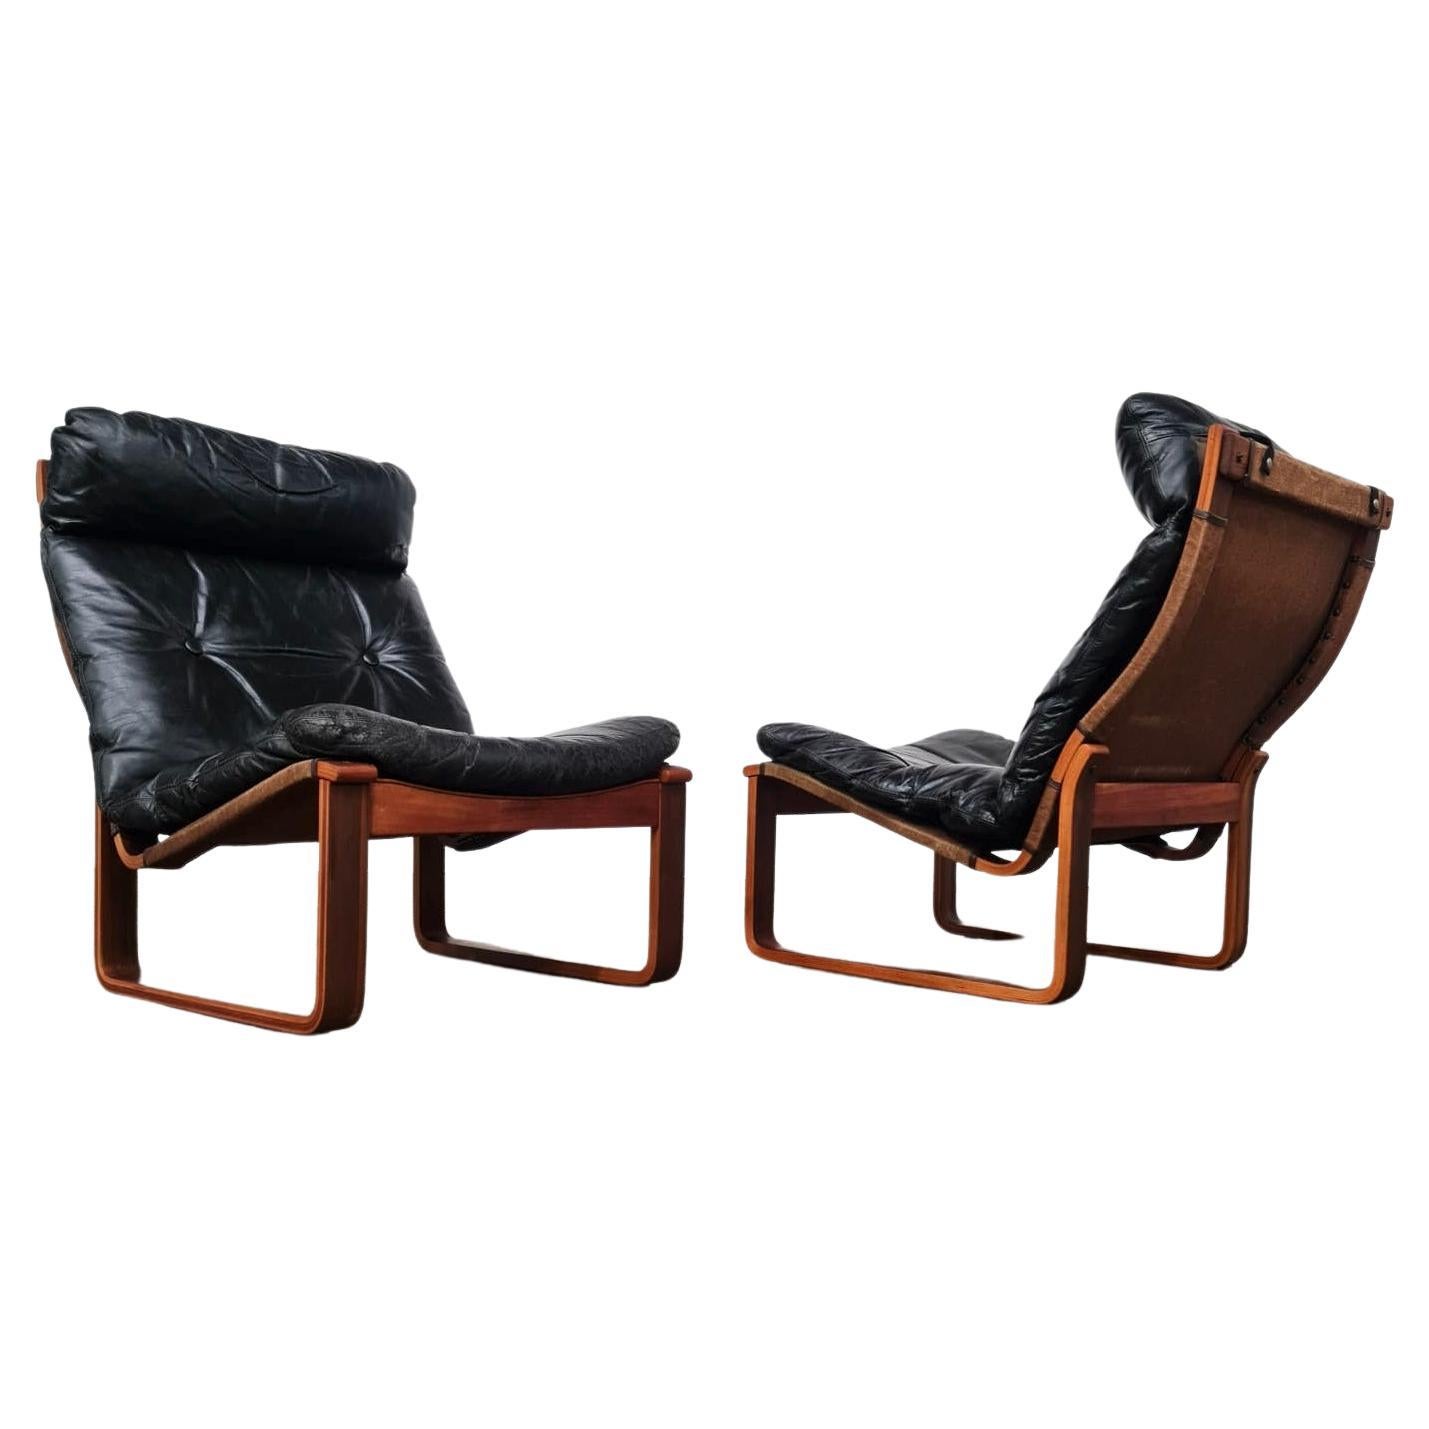 Pair of Tessa Furniture T8 Mid-Century Chairs  For Sale